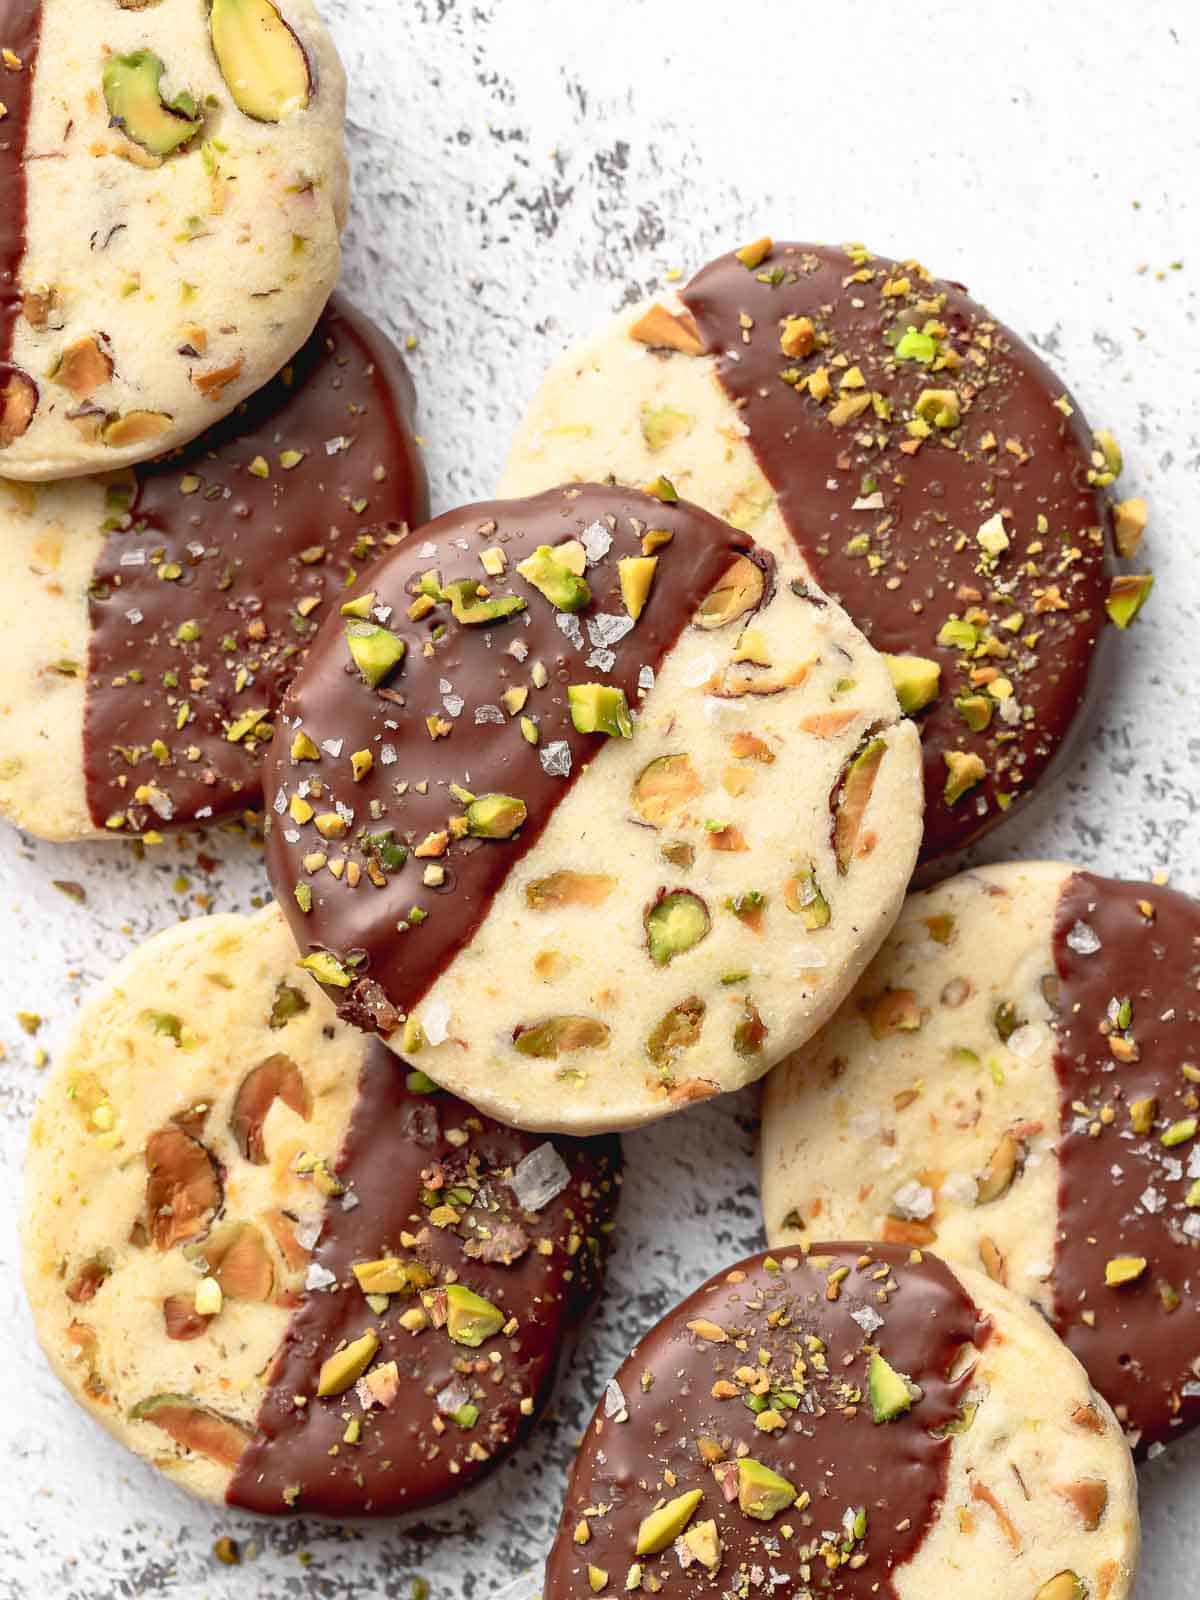 A plate of pistachio shortbread cookies dipped in chocolate.